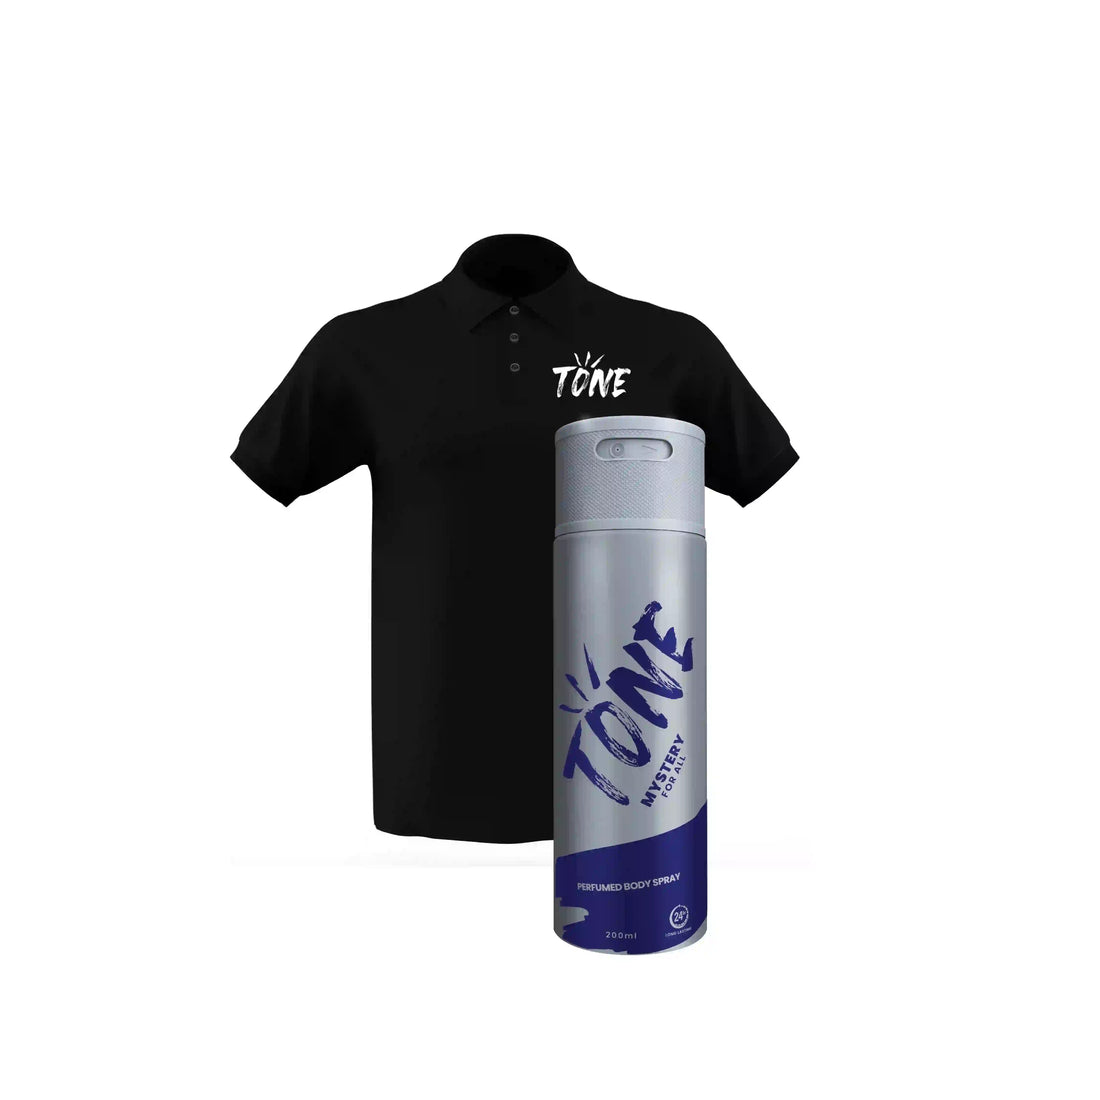 🎁 T-Shirt and Tone Body Spray (100% off)